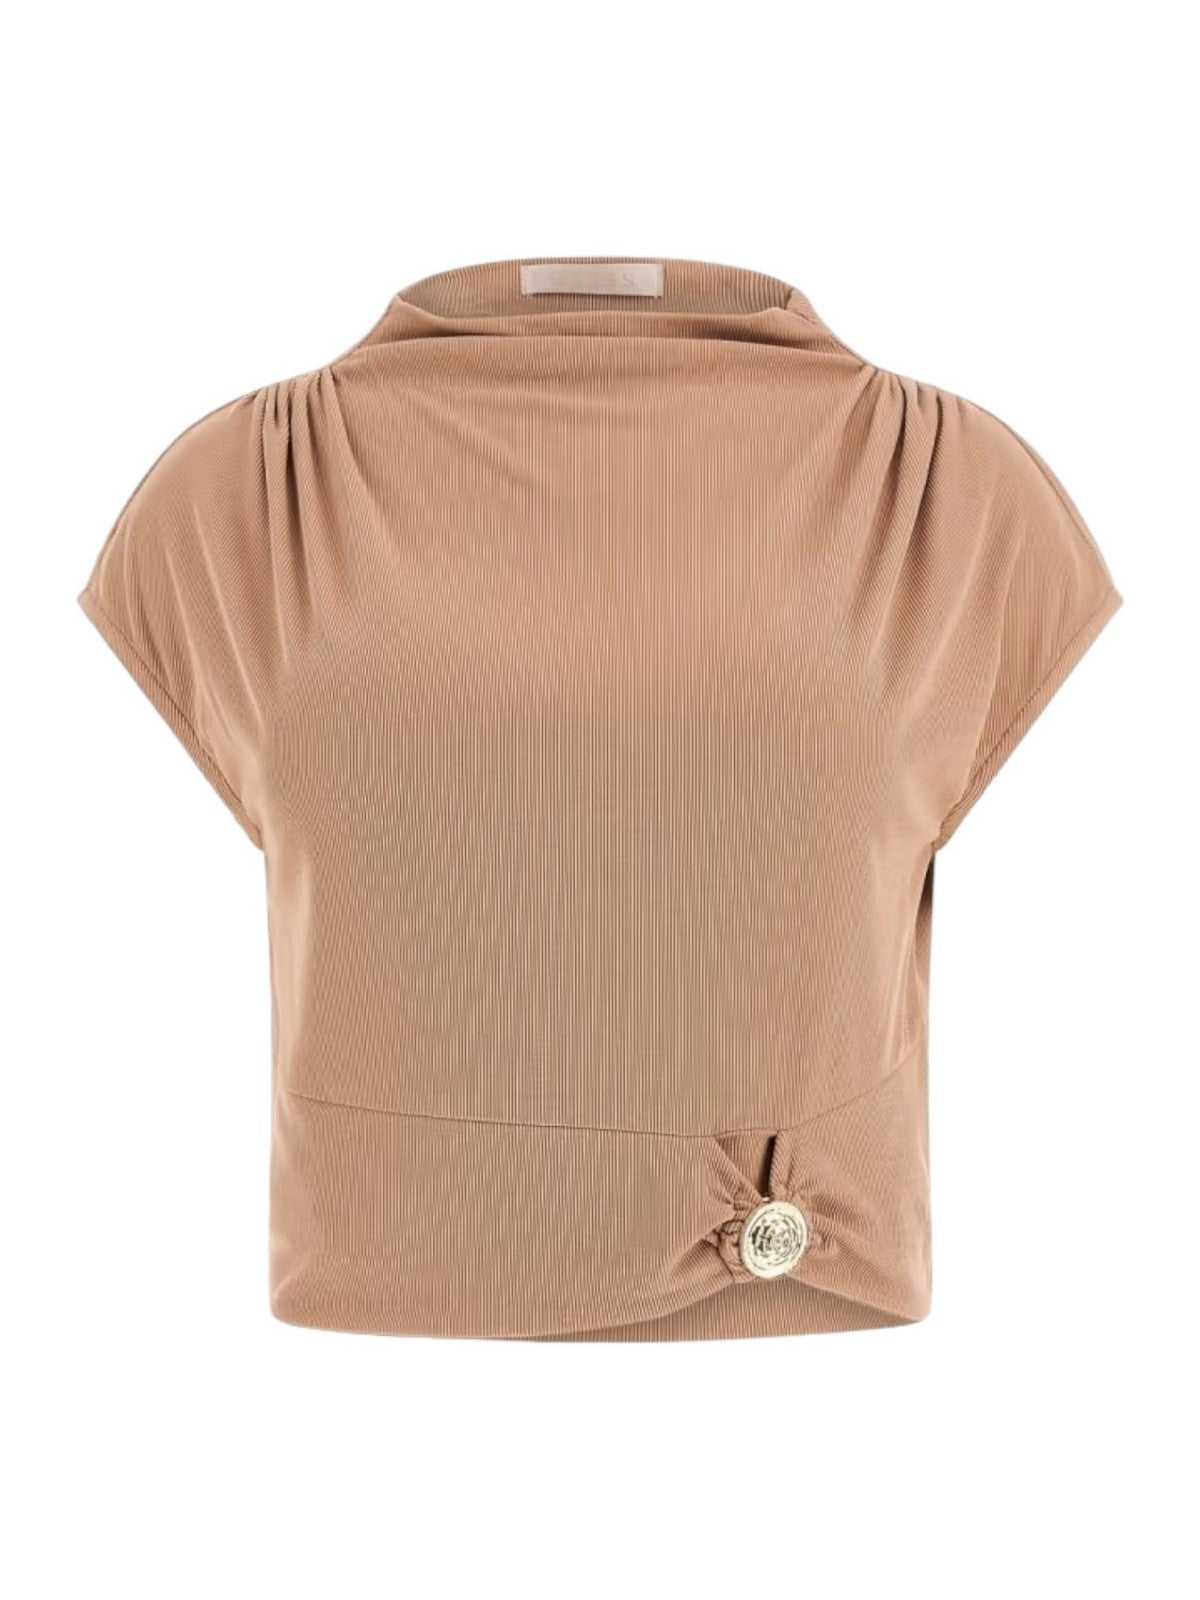 GUESS Top Donna Sl Turtle Nk Febe To W4RP40 KAQL2 G1DQ Beige